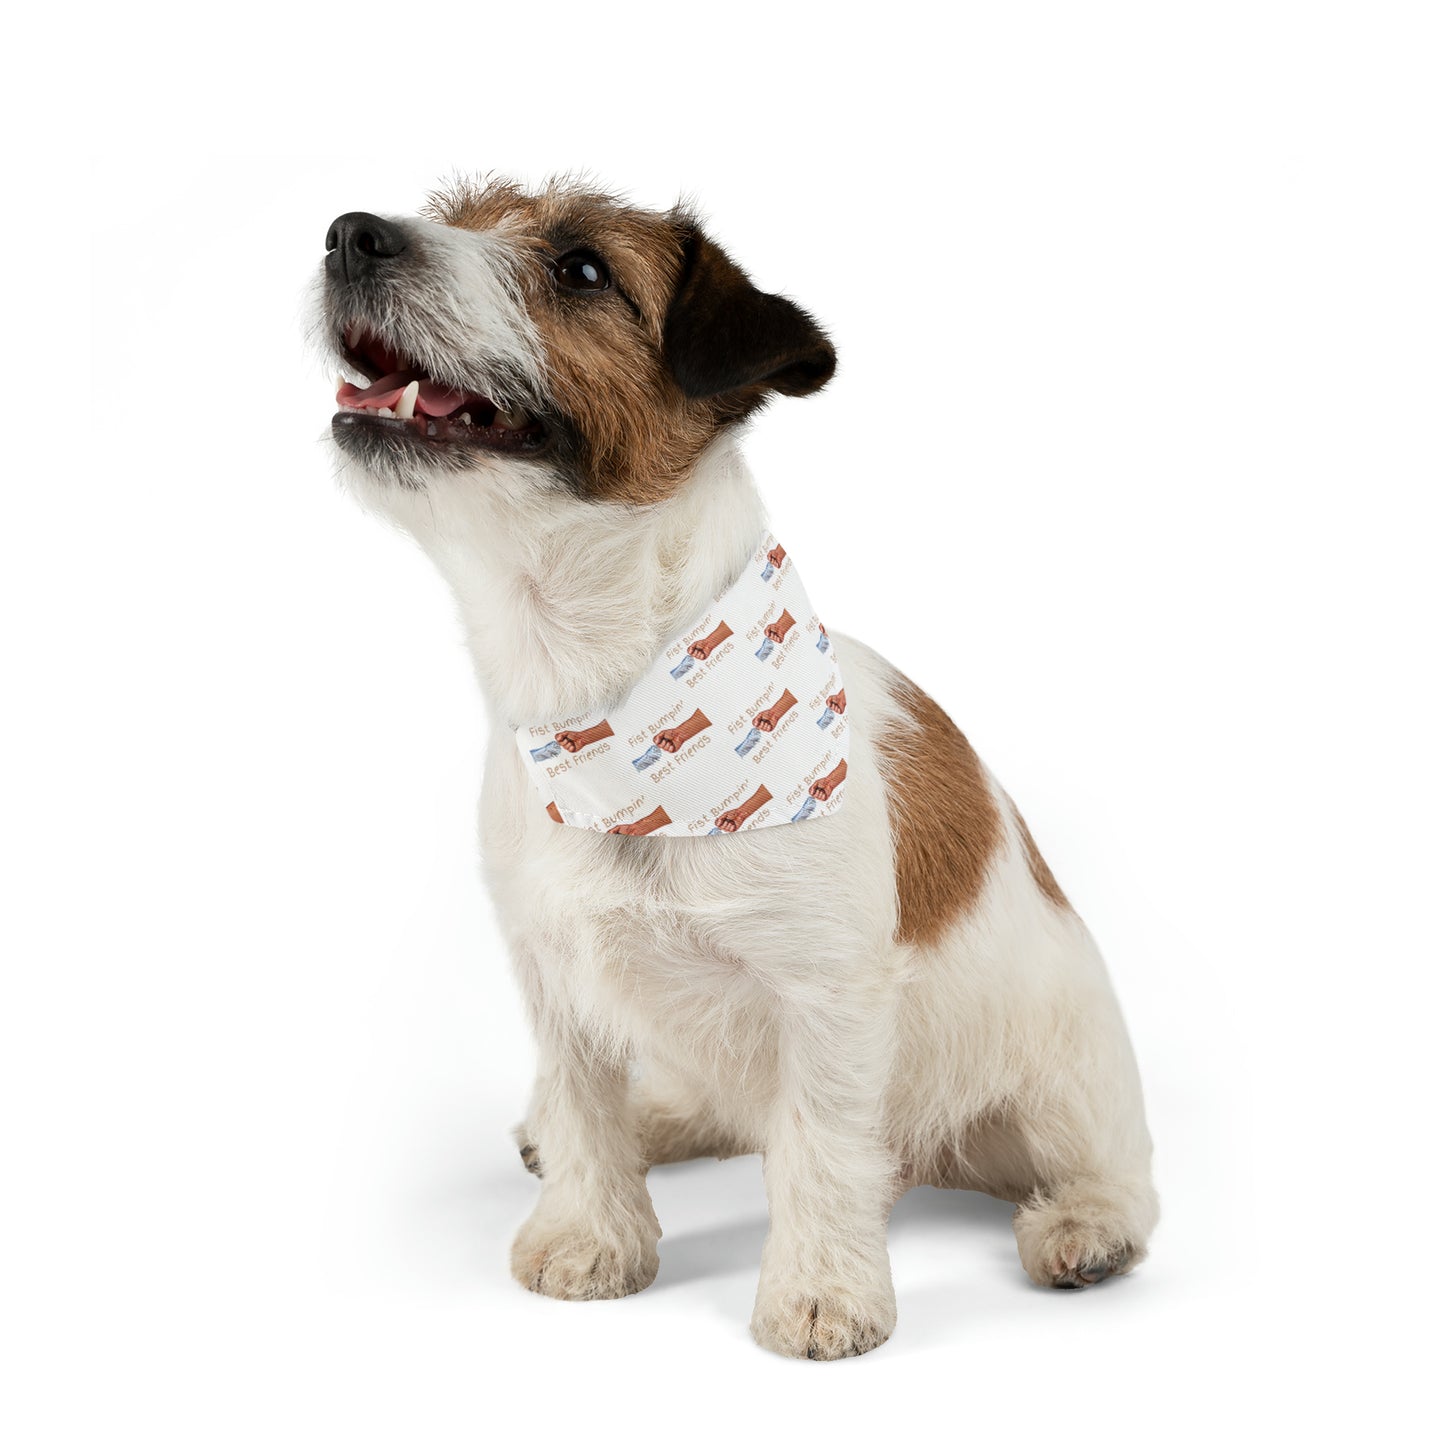 Fist Bumpin’ Best Friends Opie’s Cavalier King Charles Spaniel Paw Pet Bandana Collar White with Tan lettering.